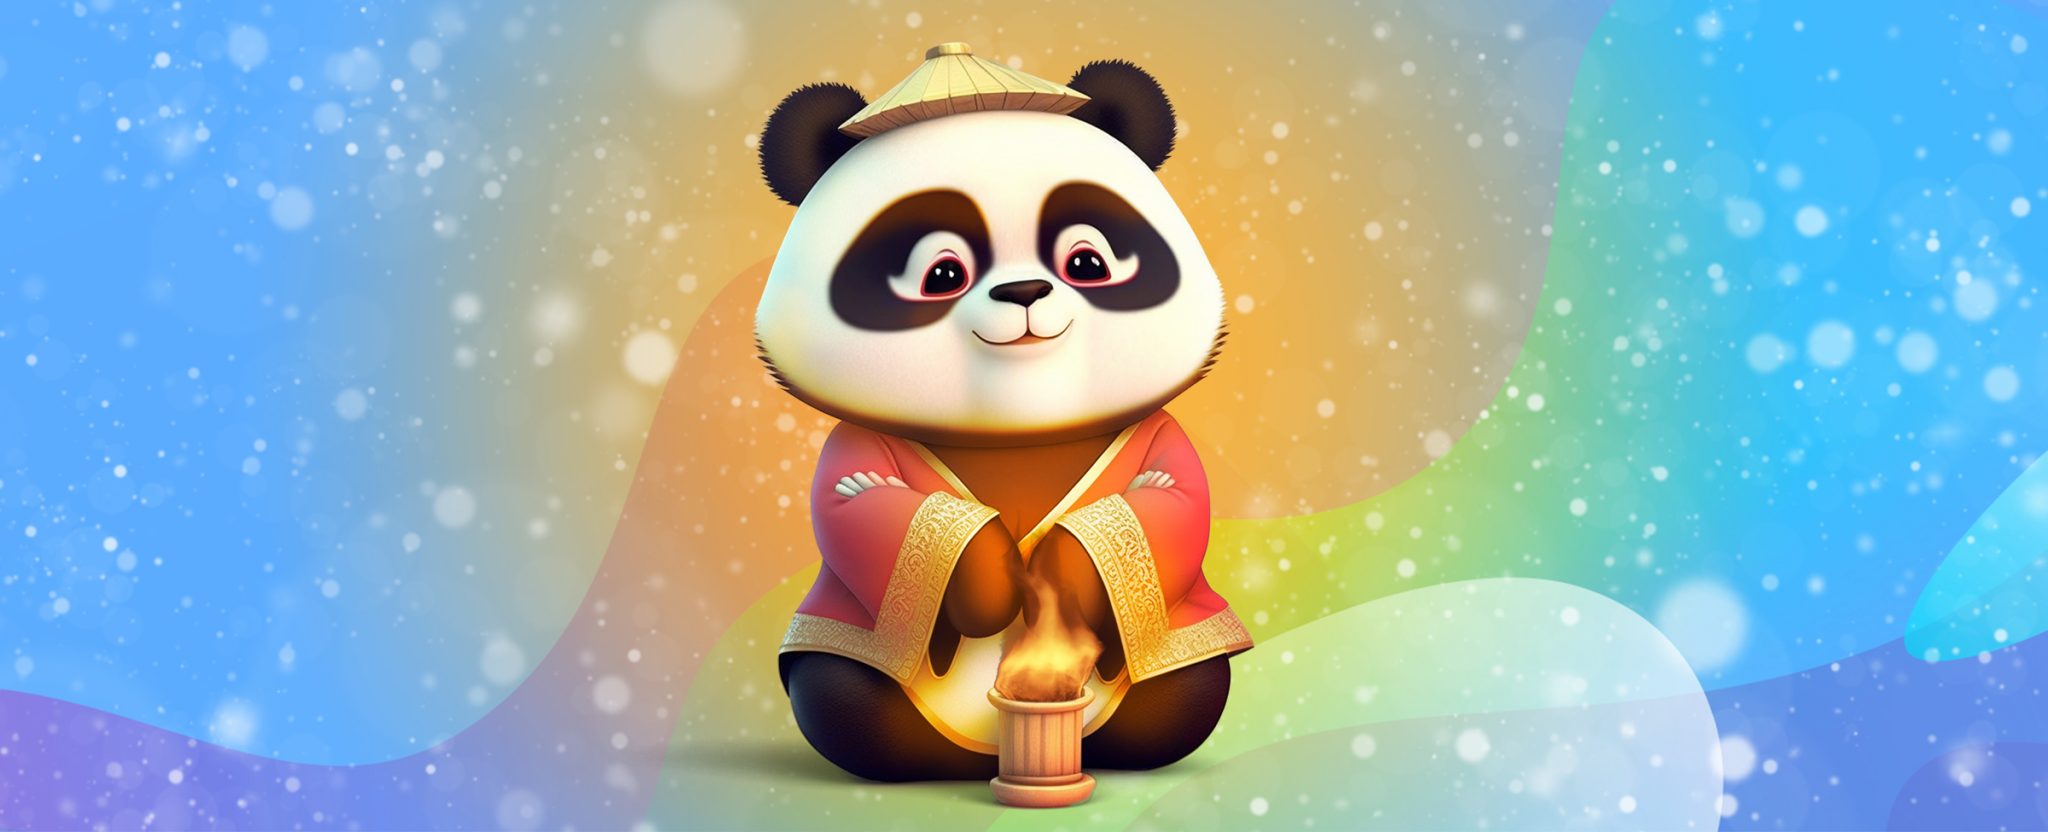 A 3D-animated panda wearing a traditional Japanese costume sits in front of a small fire, surrounded by falling snow.